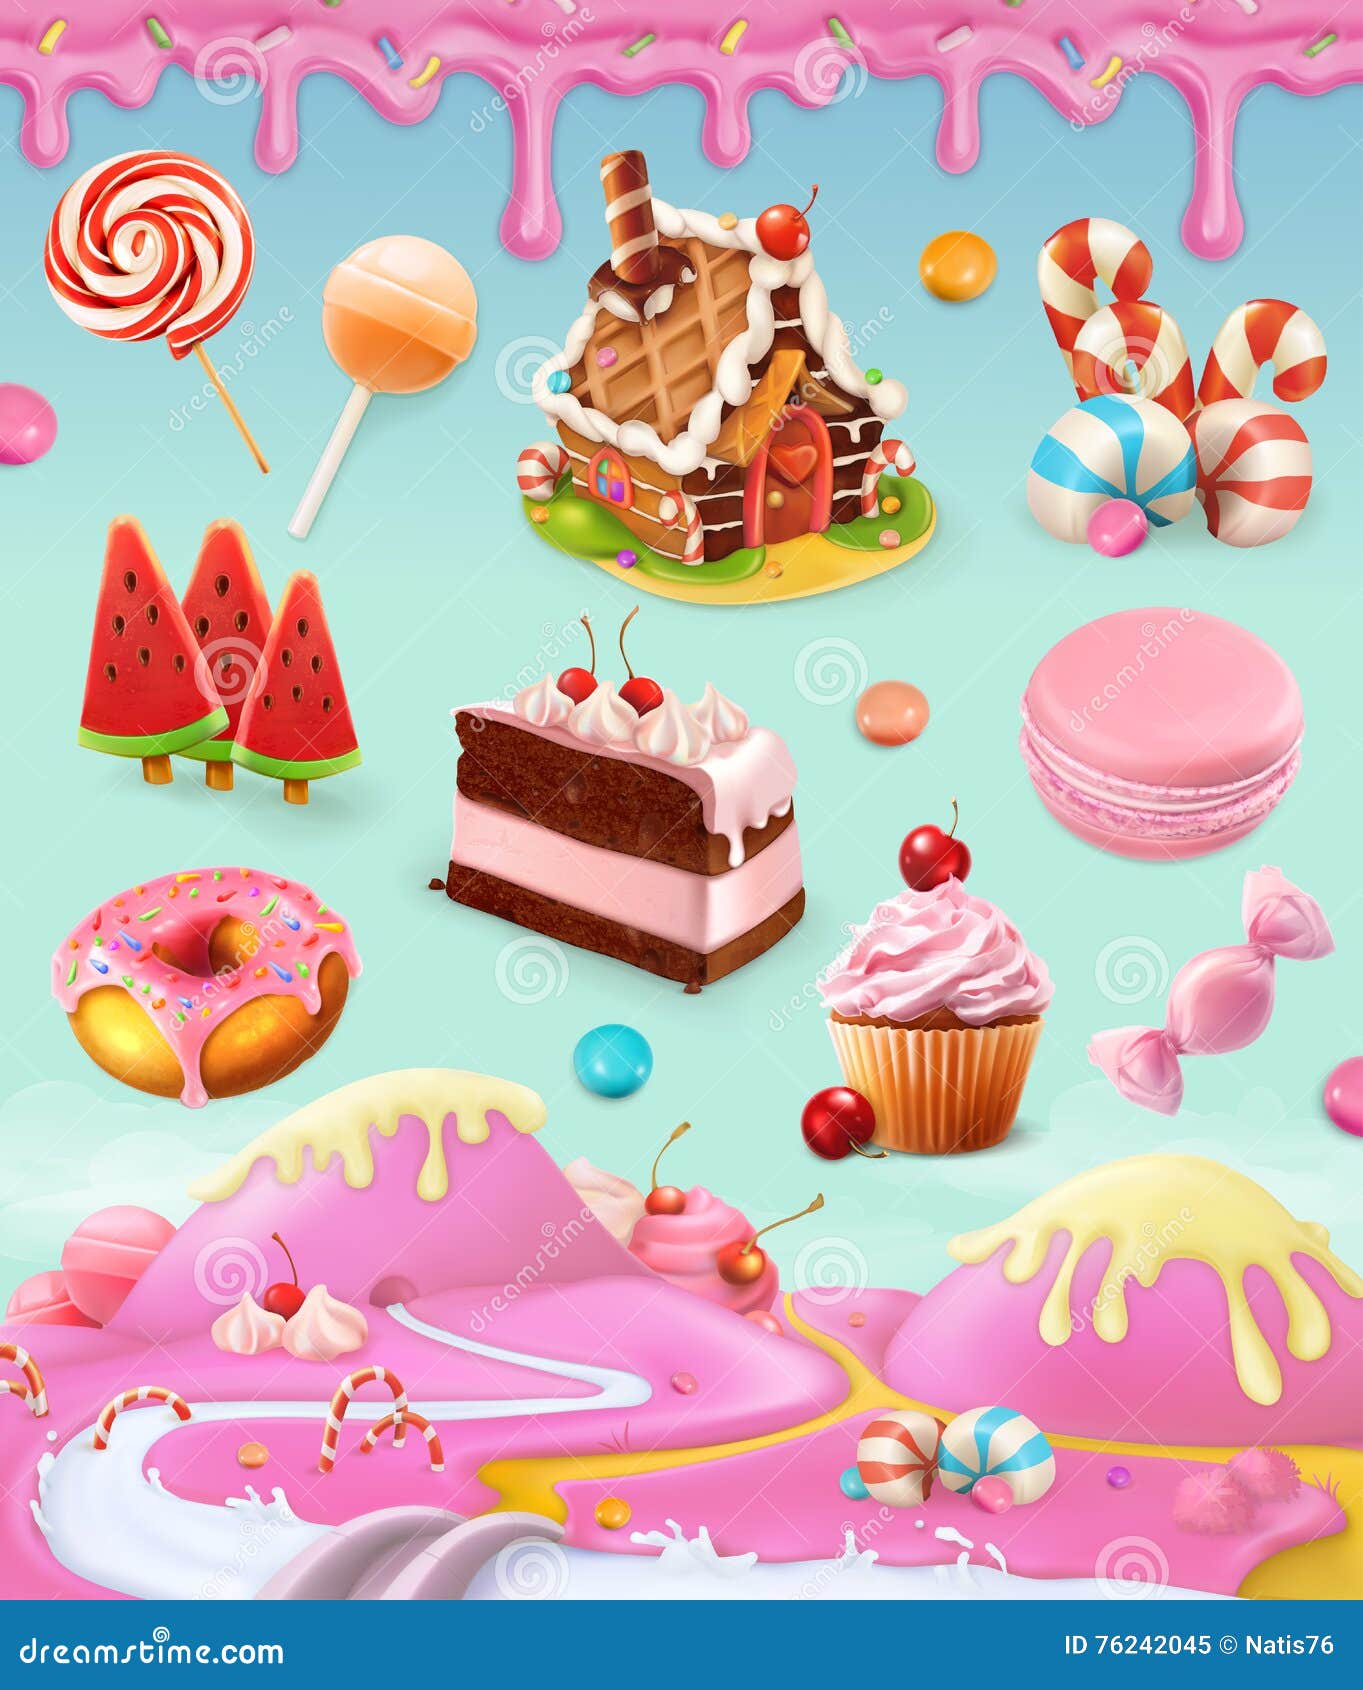 confectionery and desserts